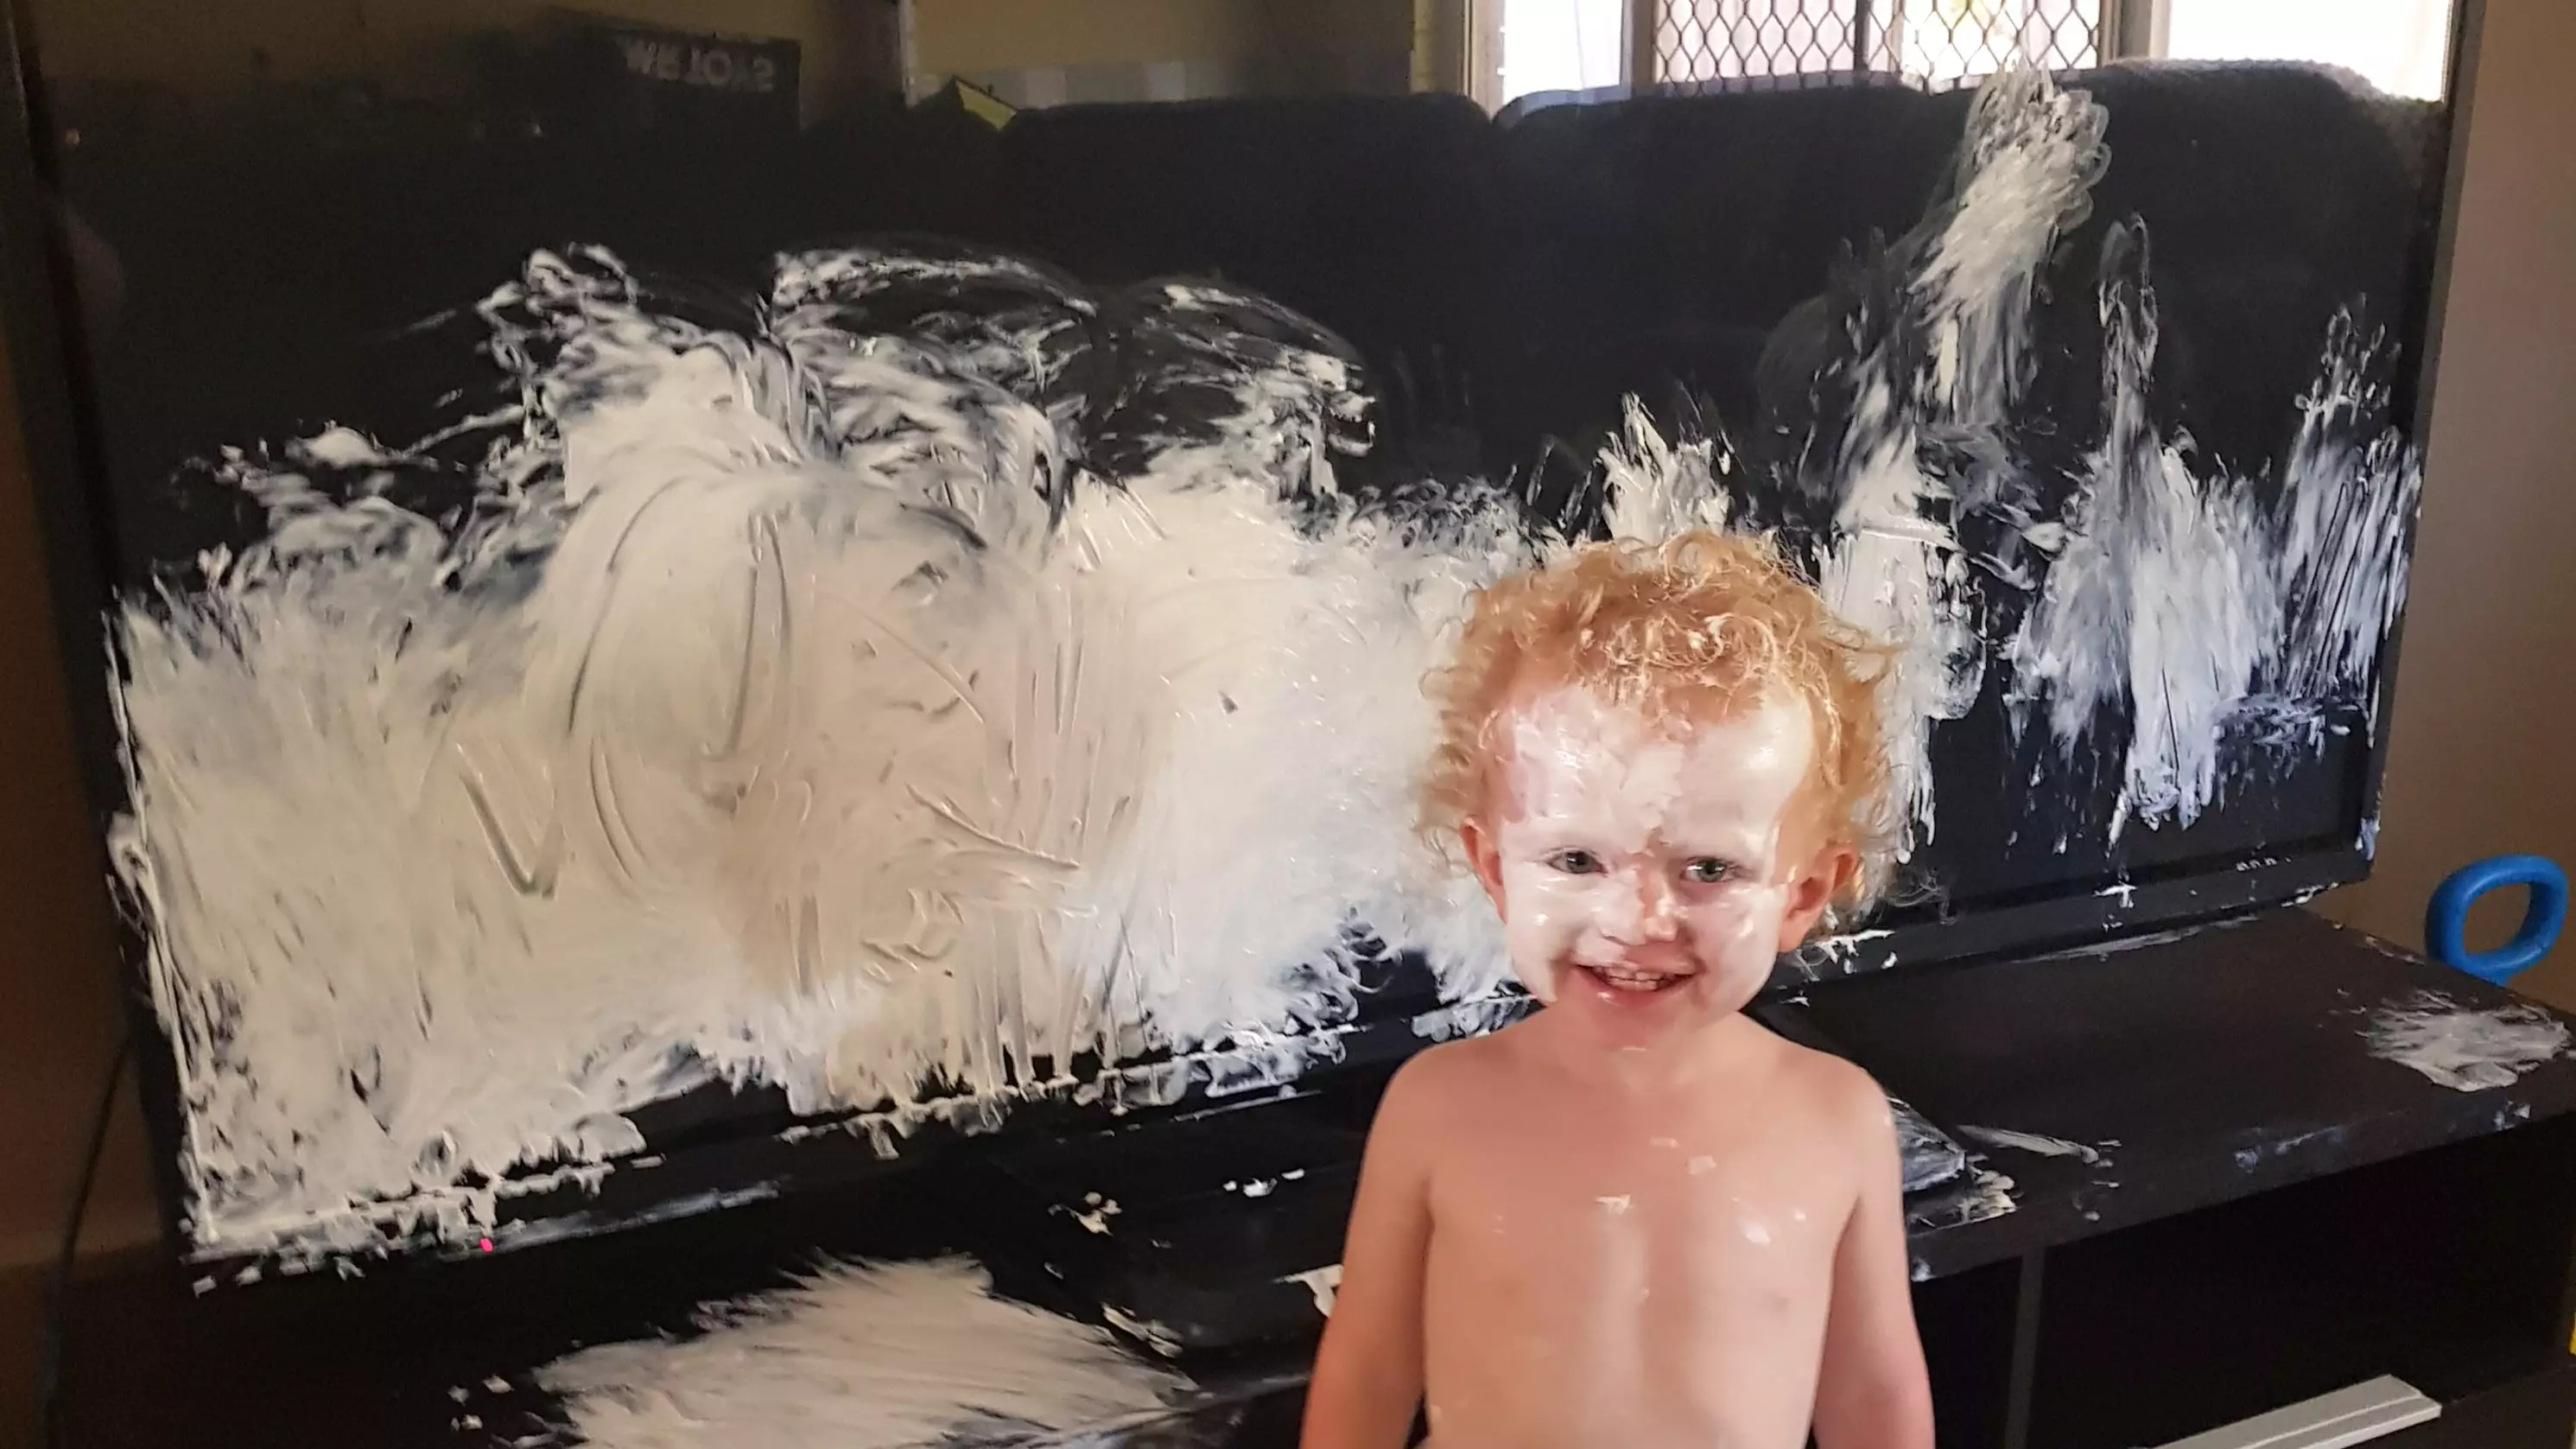 Toddler Covers £1,600 TV In Nappy Cream After Being Left Alone For Five Minutes